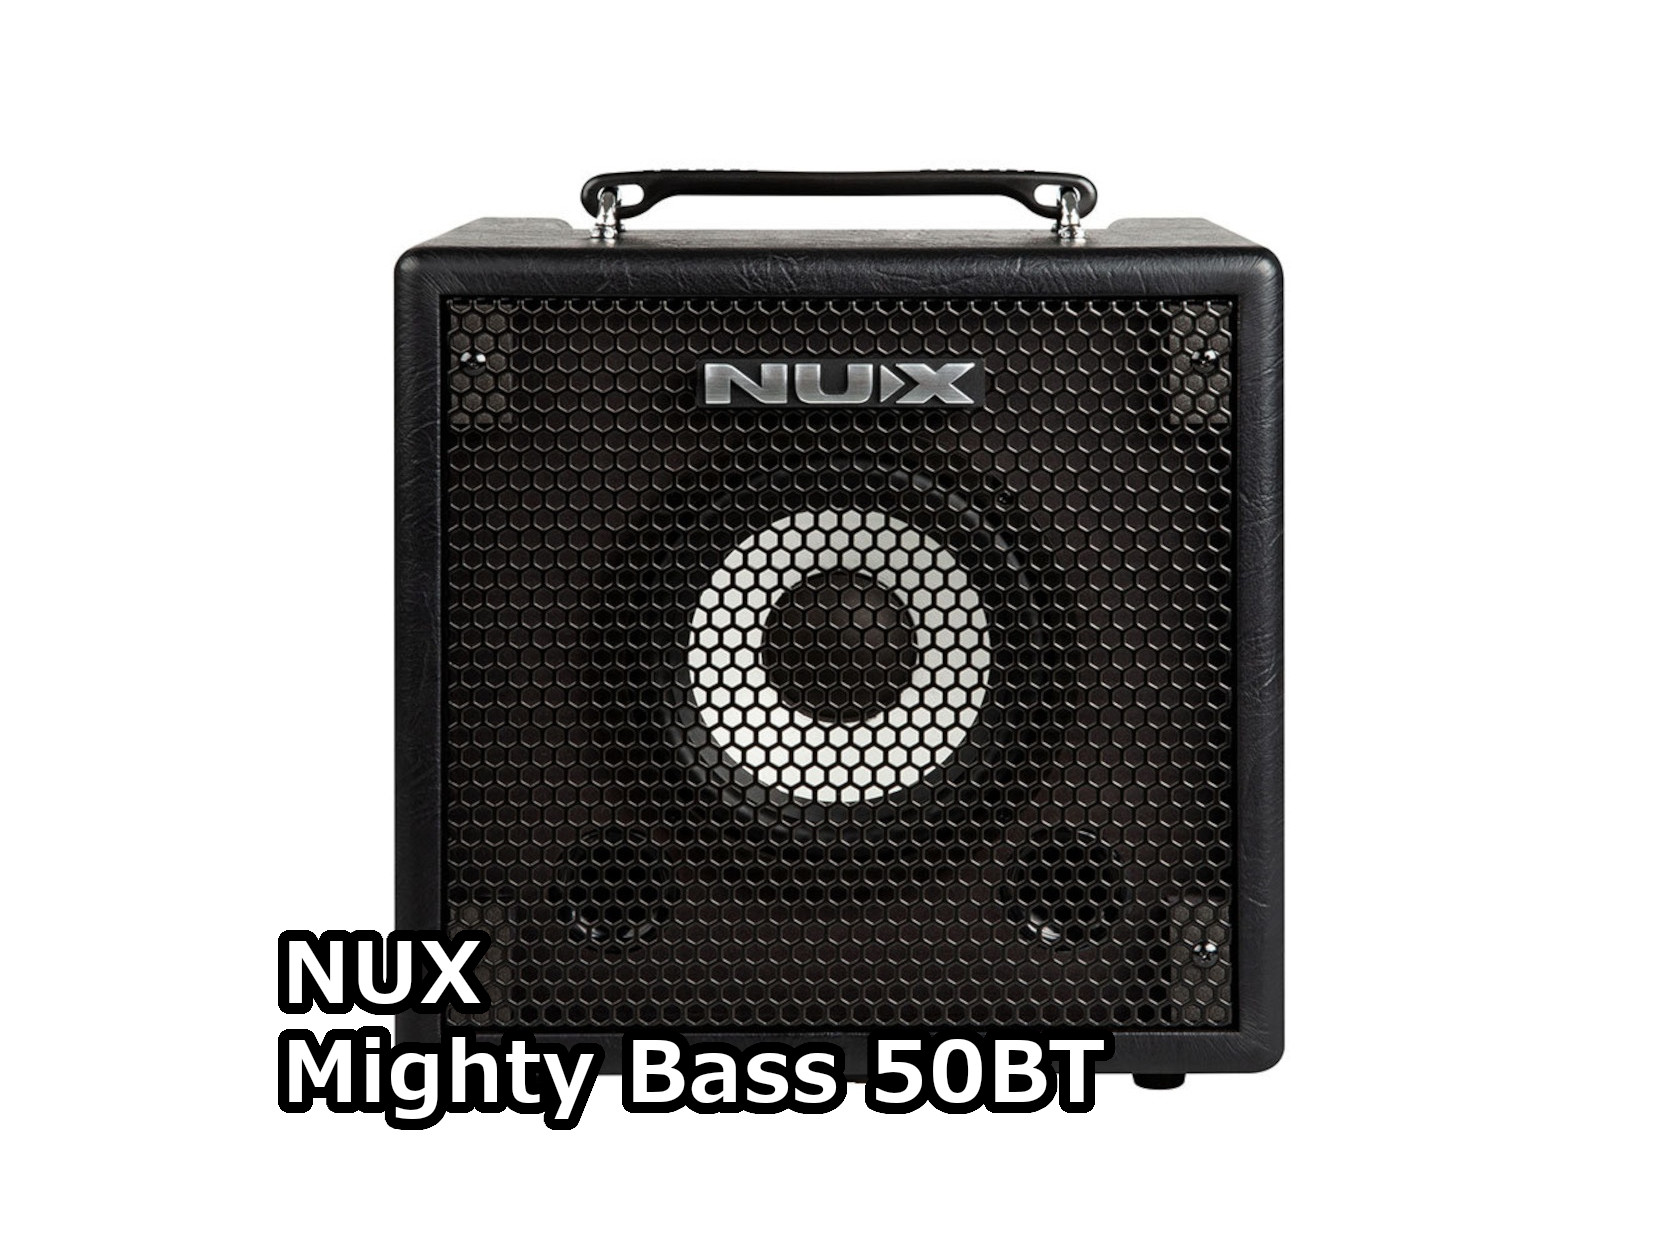 NUX Mighty Bass 50BT 入荷！